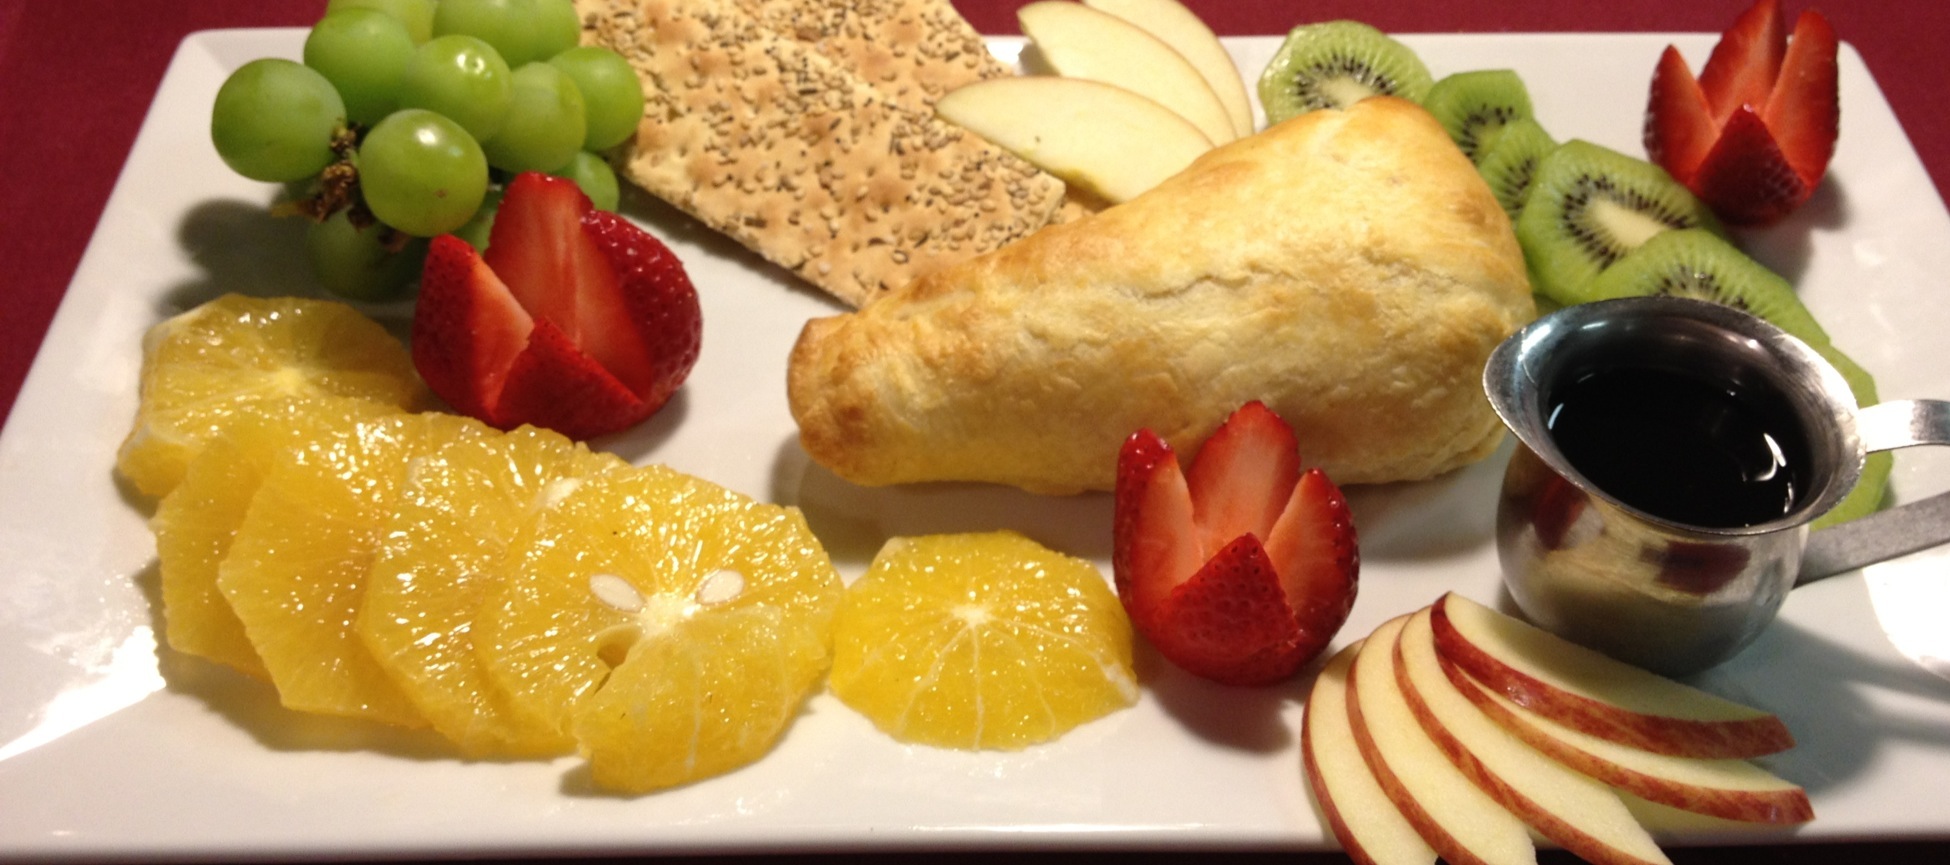 Baked Brie in Puff Pastry Crust with Fresh Fruit and Crackers..Sweet Port Wine Sauce